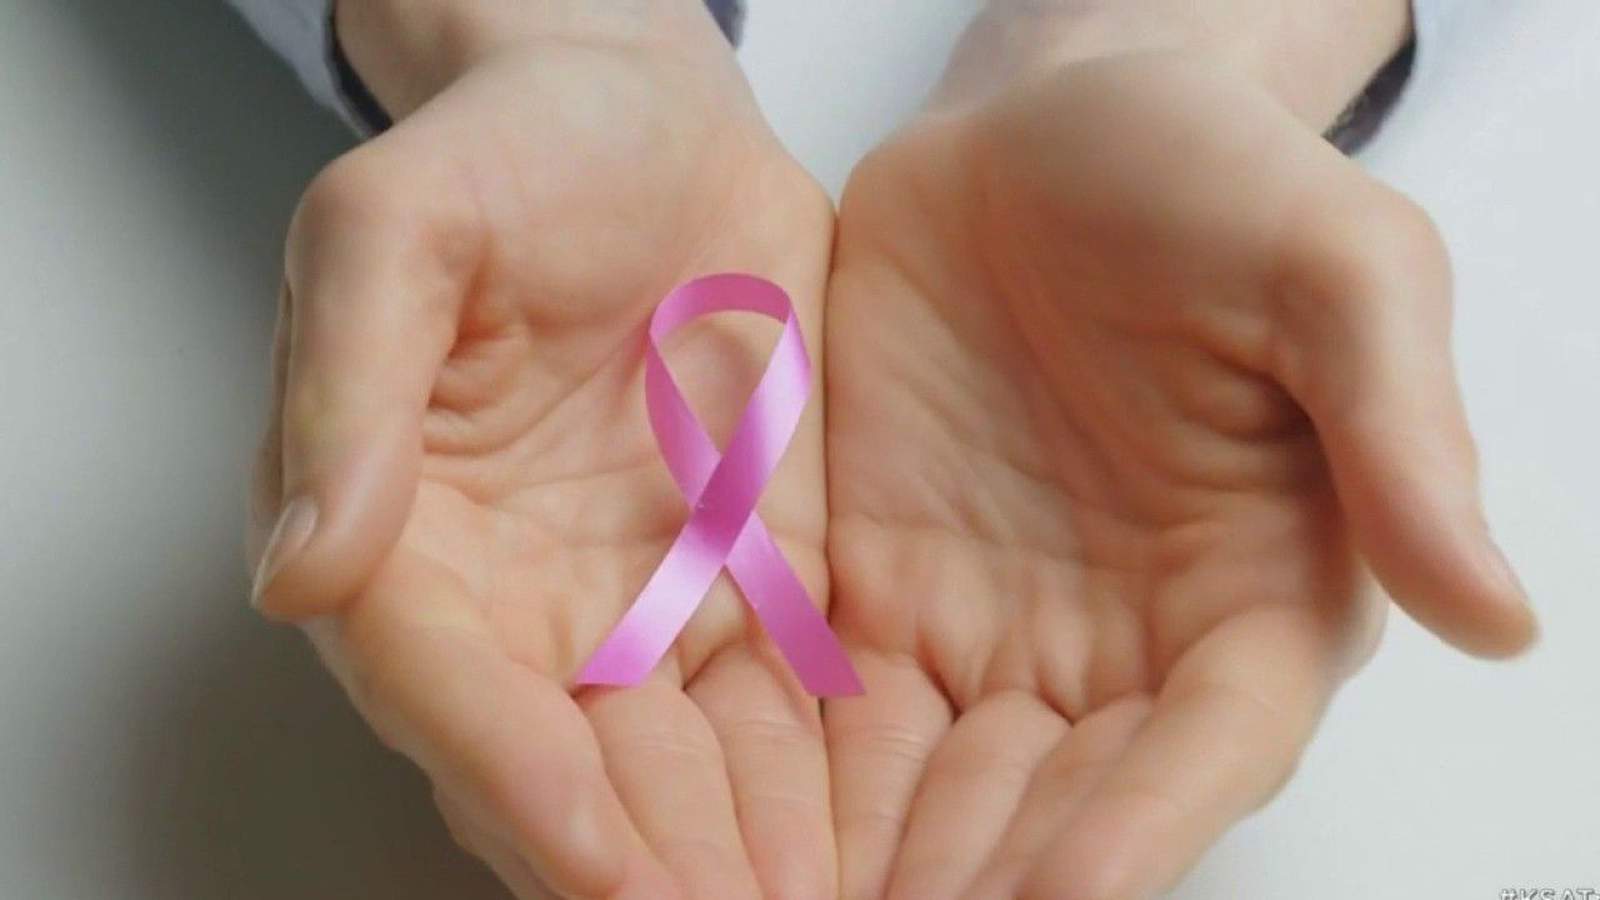 Avoid ‘Pinkwashing’ scams during Breast Cancer Awareness Month